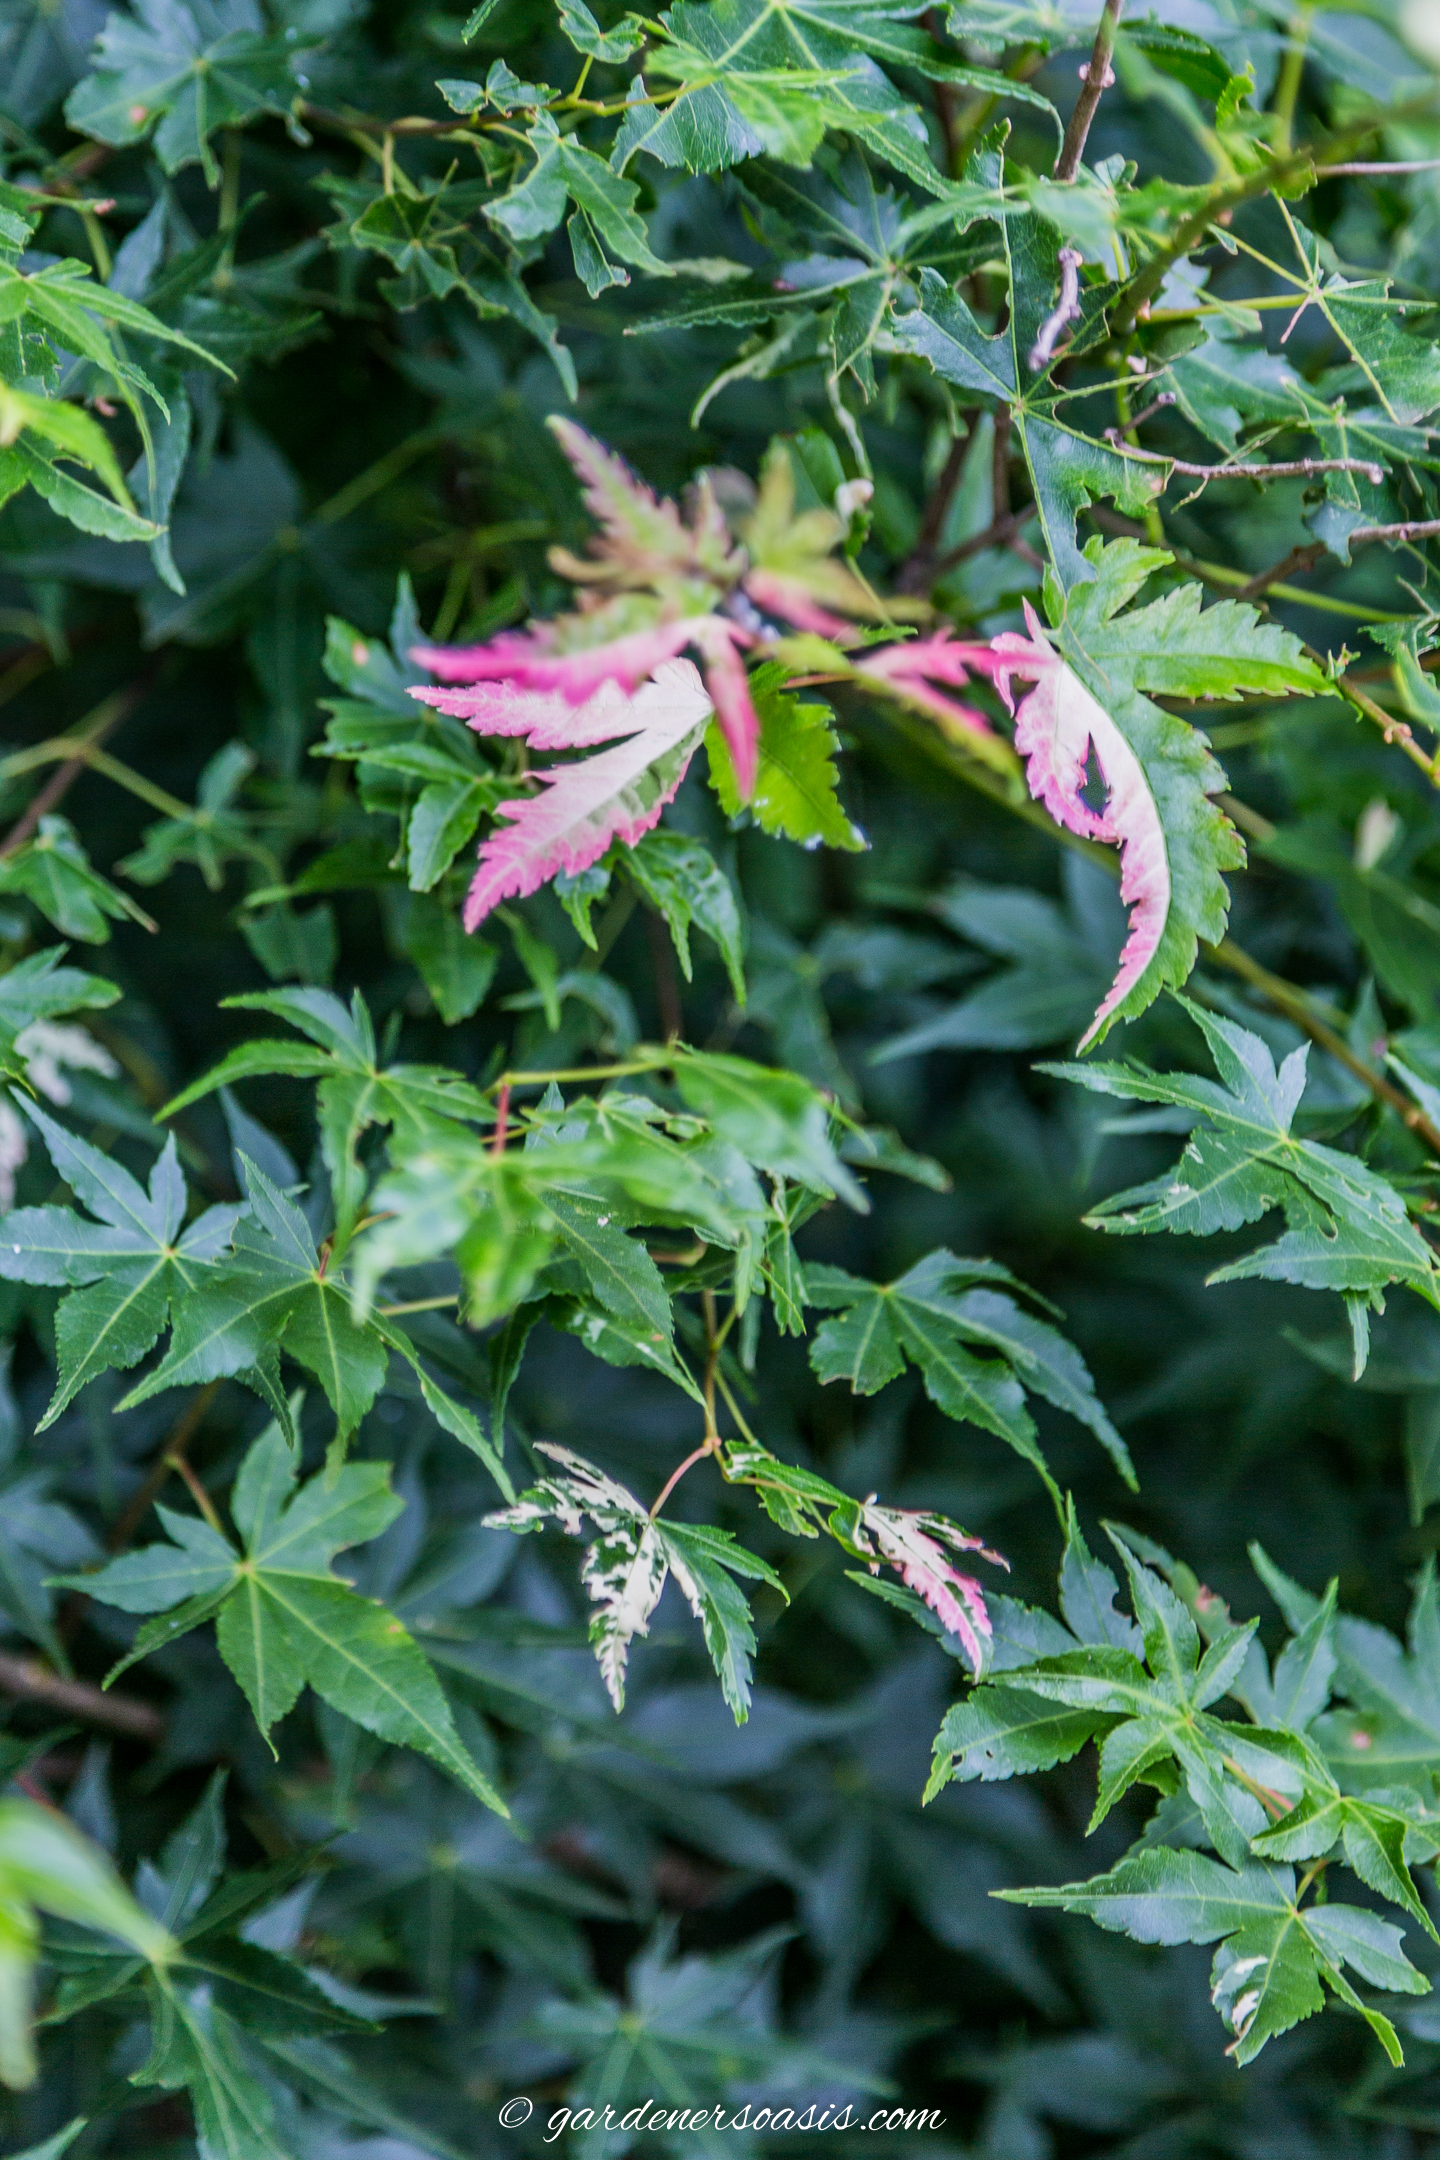 Japanese Maples can have many different colors of leaves | 10 Surprising Things About Growing Beautiful Japanese Maples | If you want to add a Japanese Maple to your landscape (or you already have one growing in your garden) but aren't sure how to care for it, these tips on fertilizing, pruning and growing in containers (among other things) are very helpful!